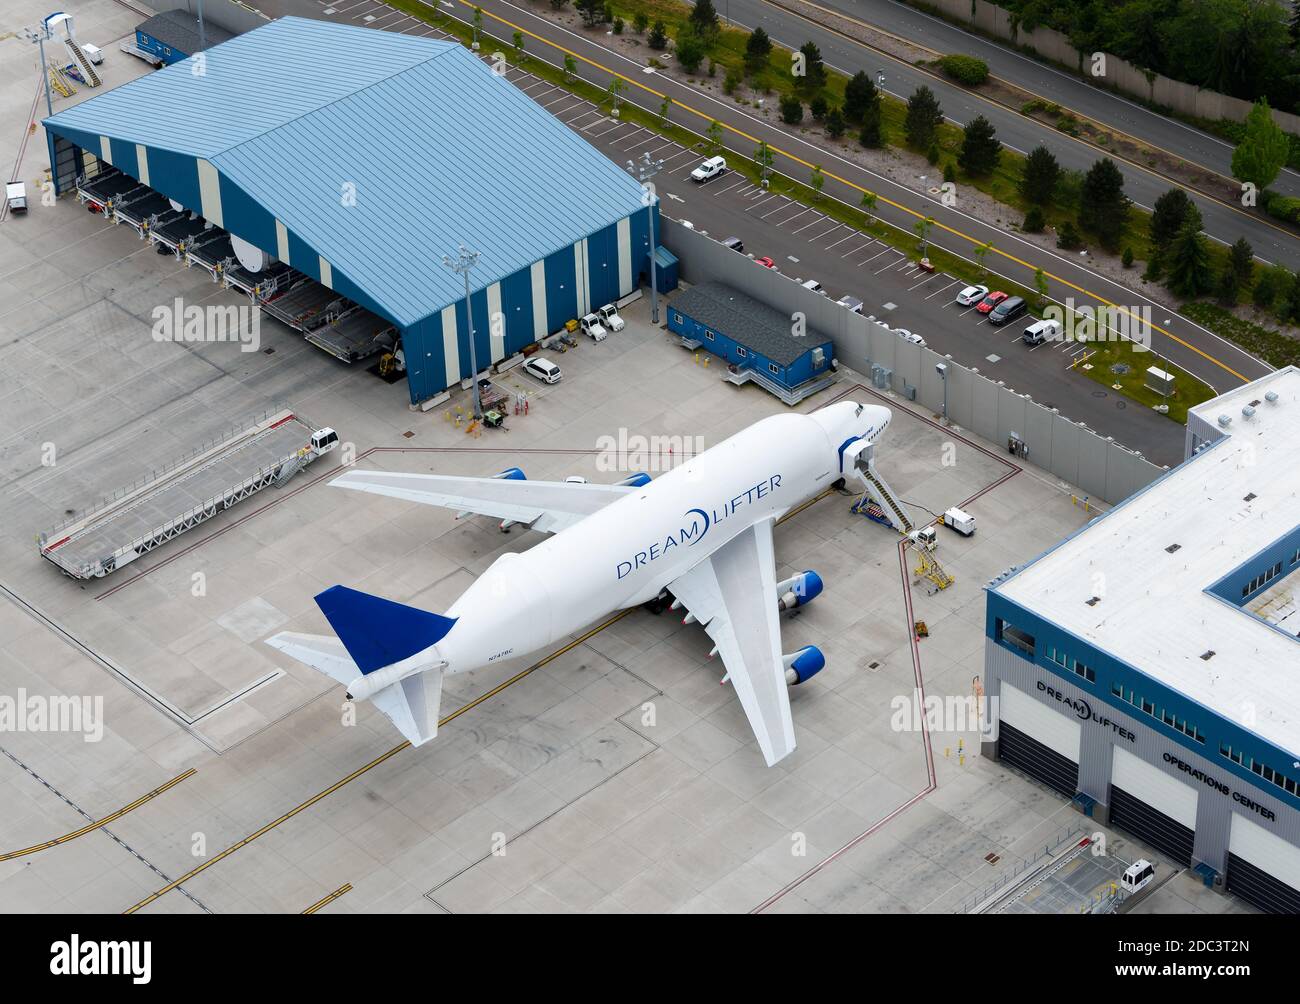 Boeing 747 LCF Dreamlifter airplane Operations Center aerial view at Paine Field, Everett. Dreamlifter Large Cargo Transportation modified aircraft. Stock Photo